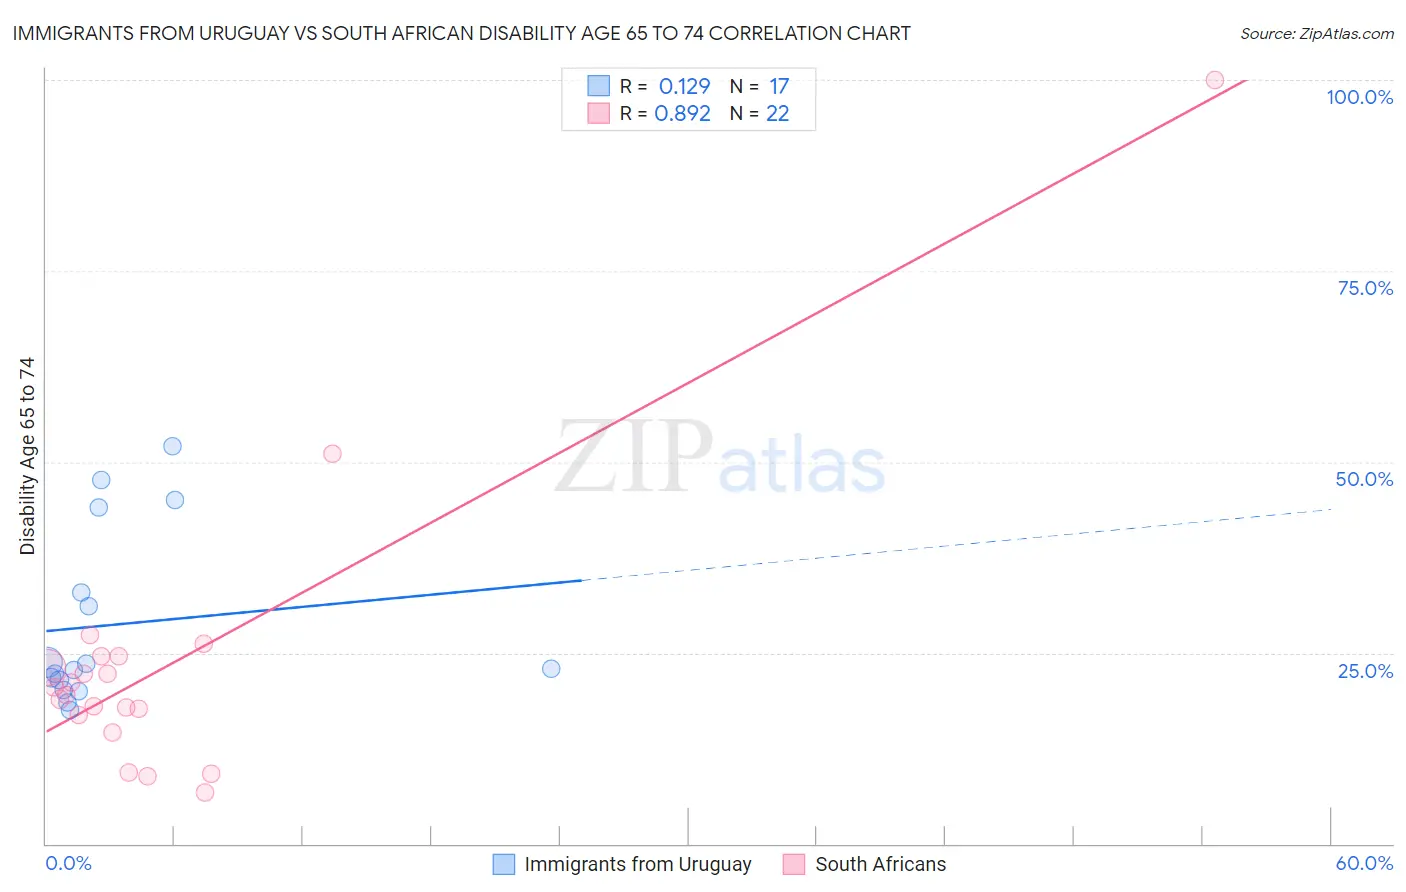 Immigrants from Uruguay vs South African Disability Age 65 to 74